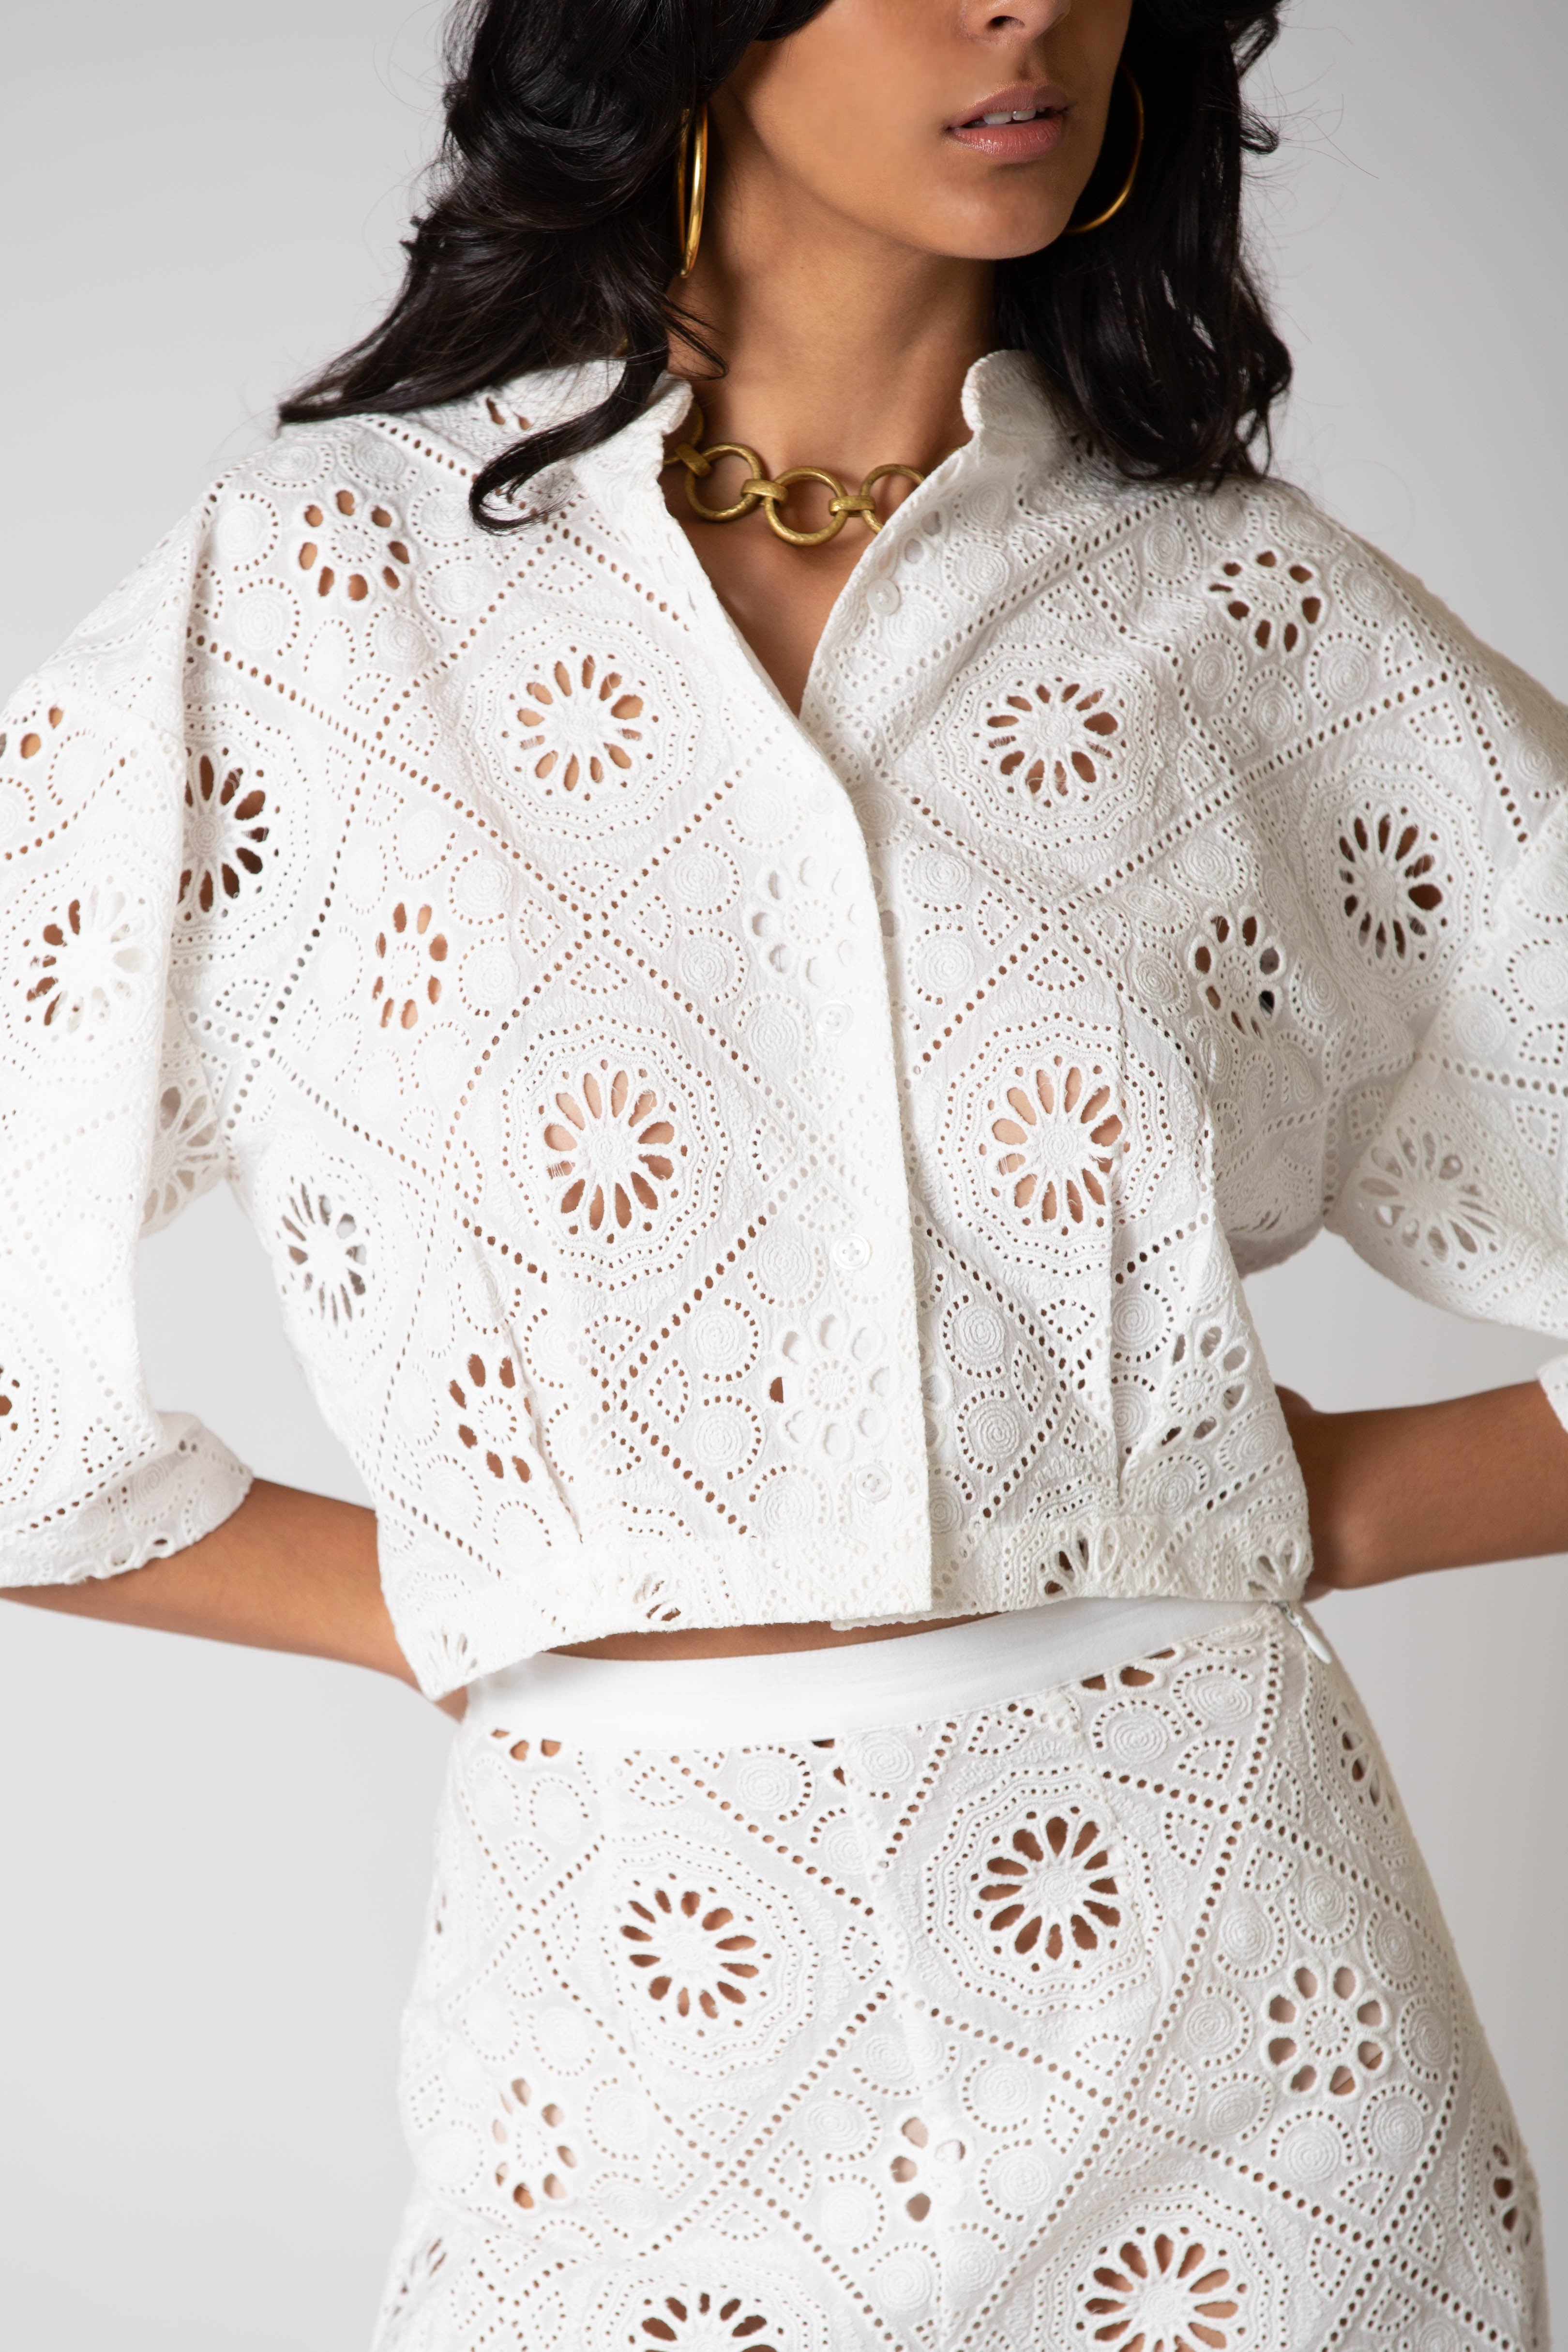 Sedona Diamond Eyelet Embroidered Top by Miguelina